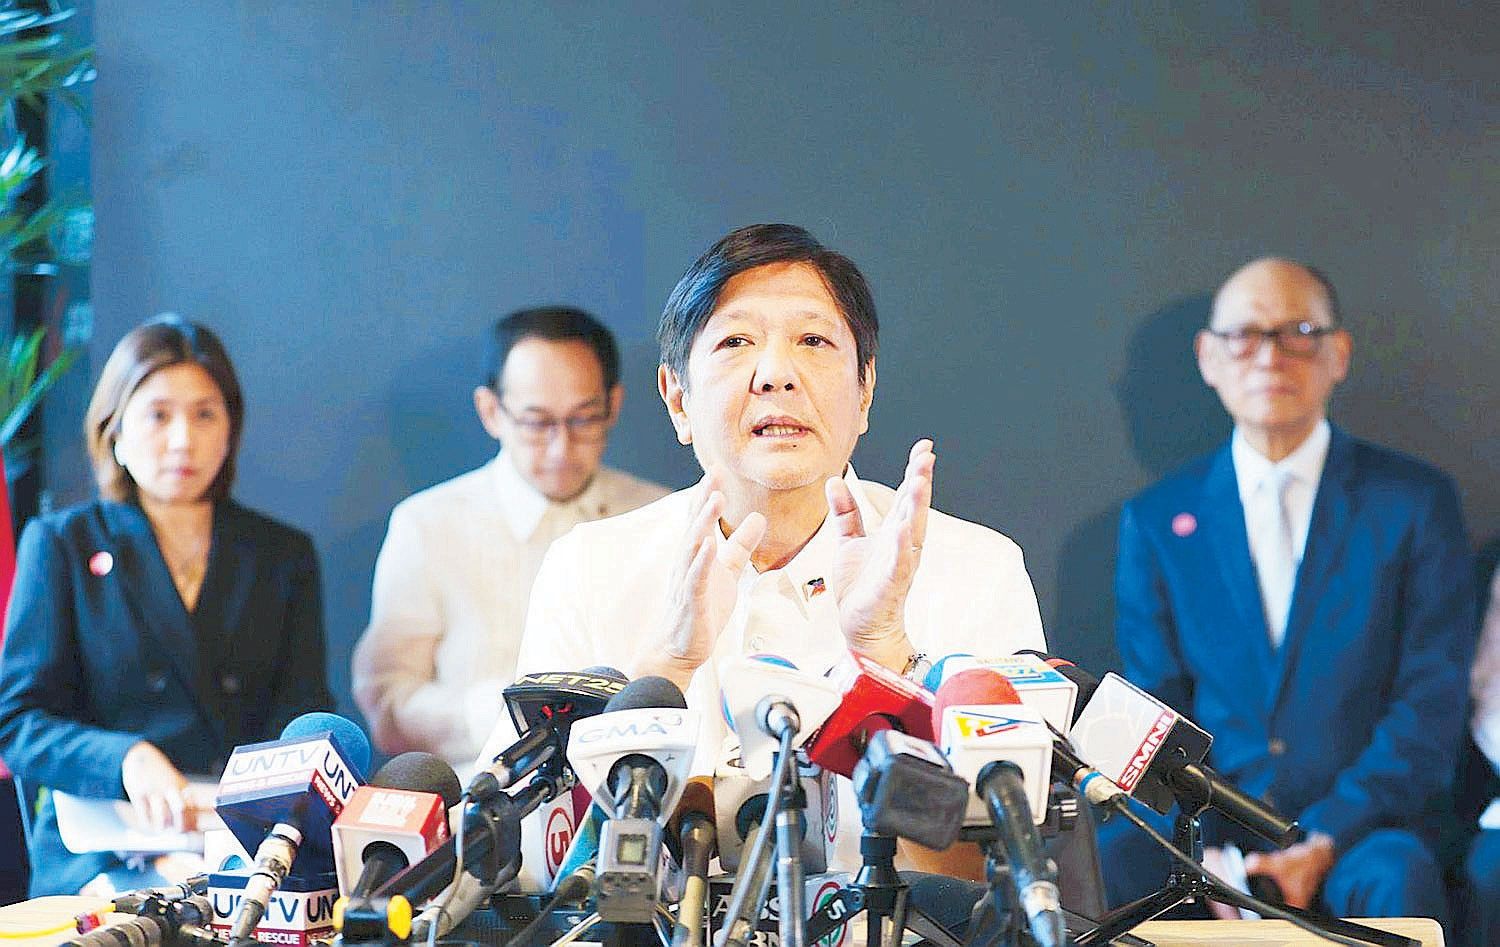 Marcos confident of Saraâ��s competence, dedication